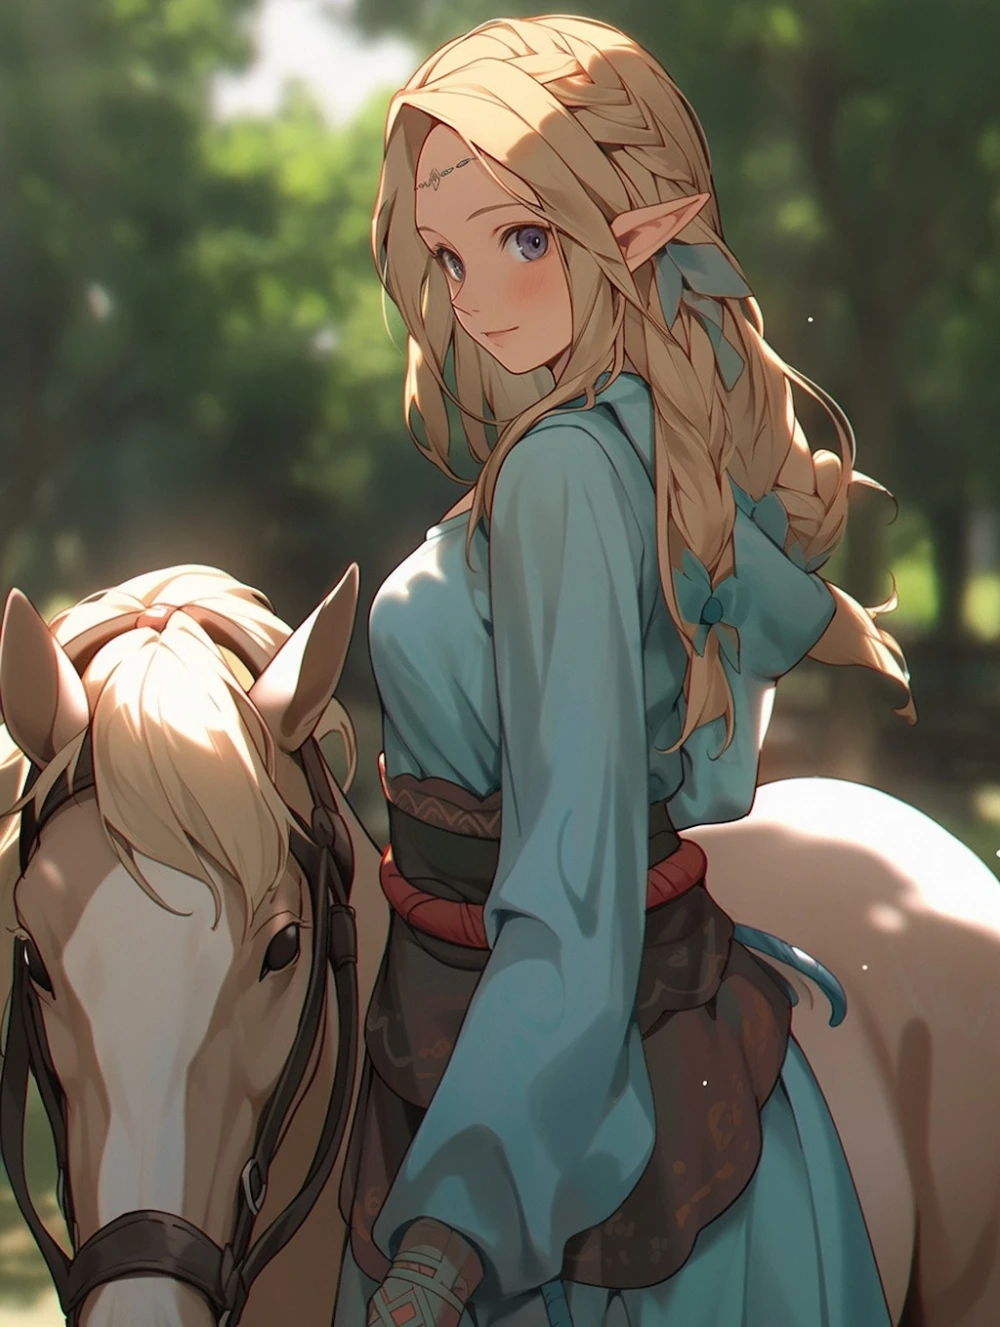 horse-anime-style-all-ages-24